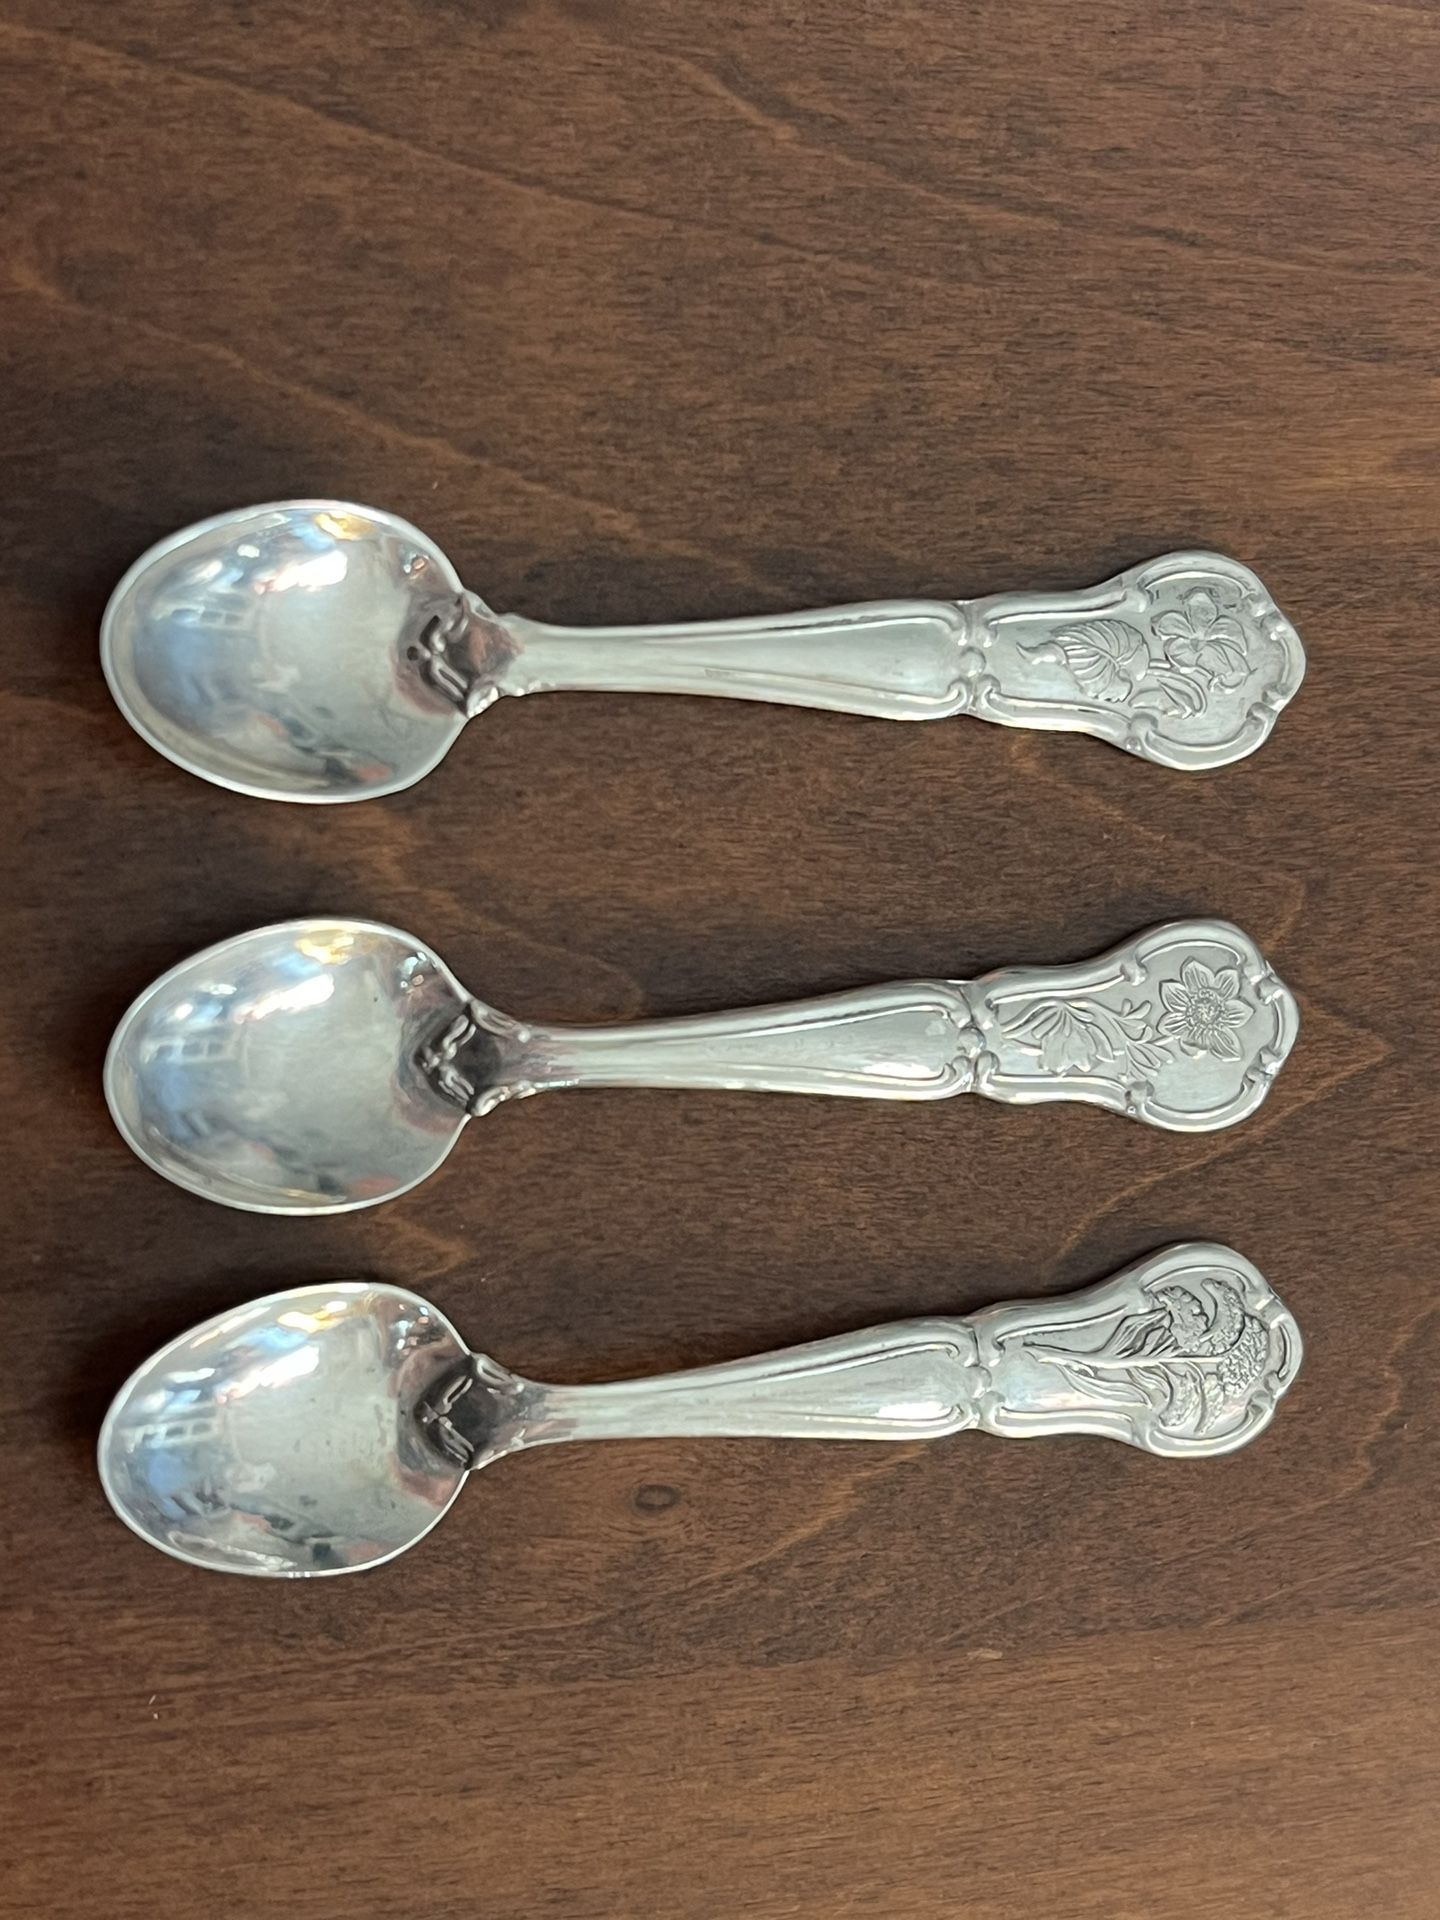 Franklin mint official State Flower Collectible Spoons